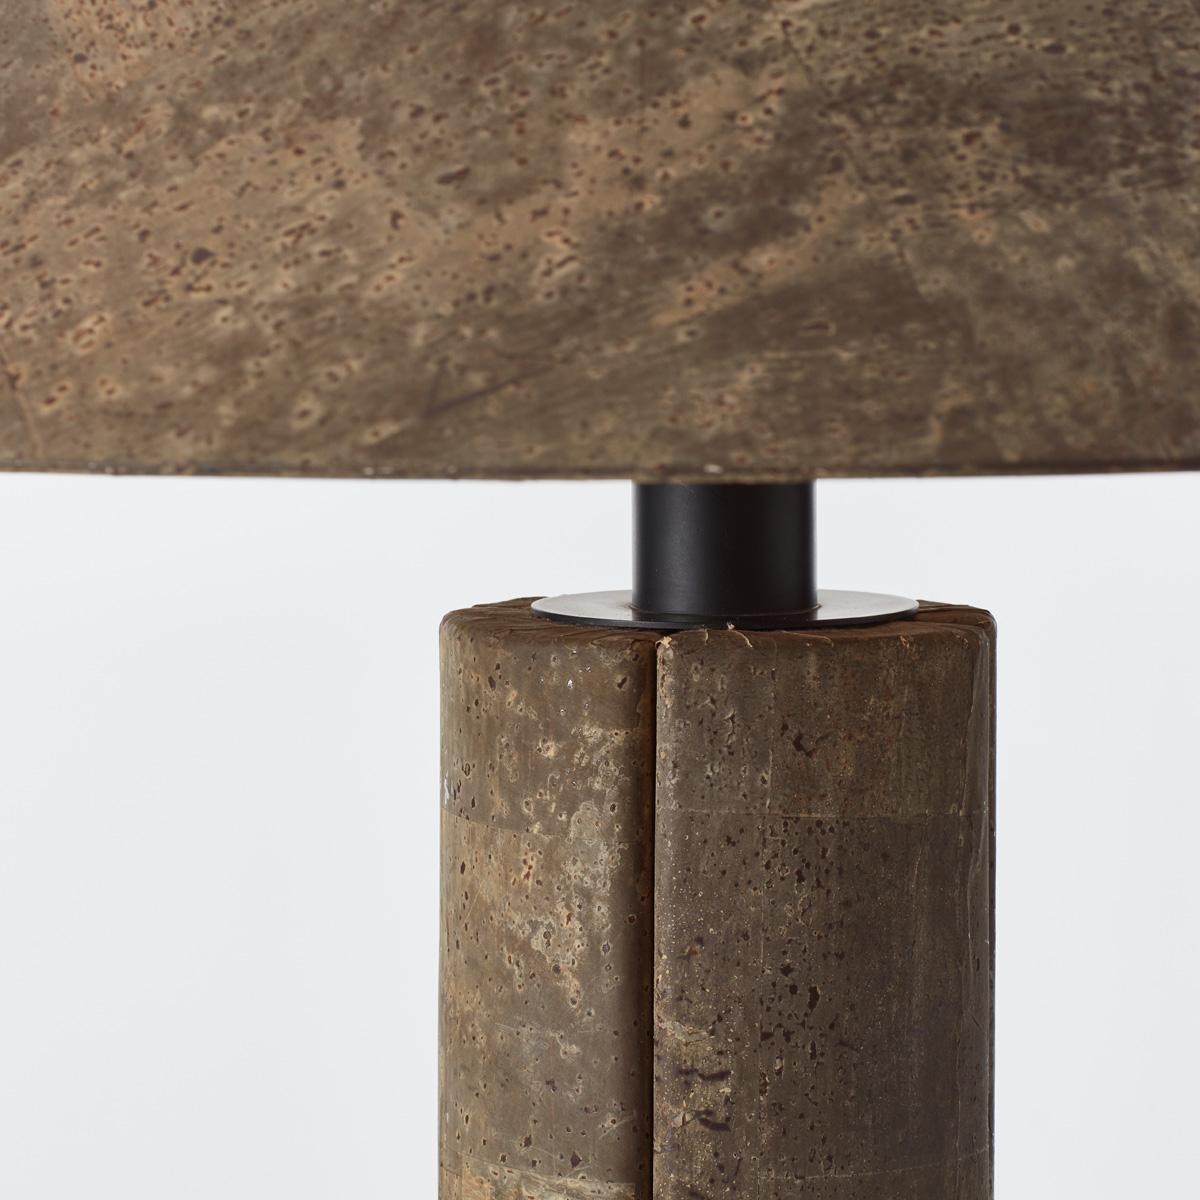 Ingo Maurer Cork Lamp for Design M, Germany 1974. Pair available.  For Sale 2